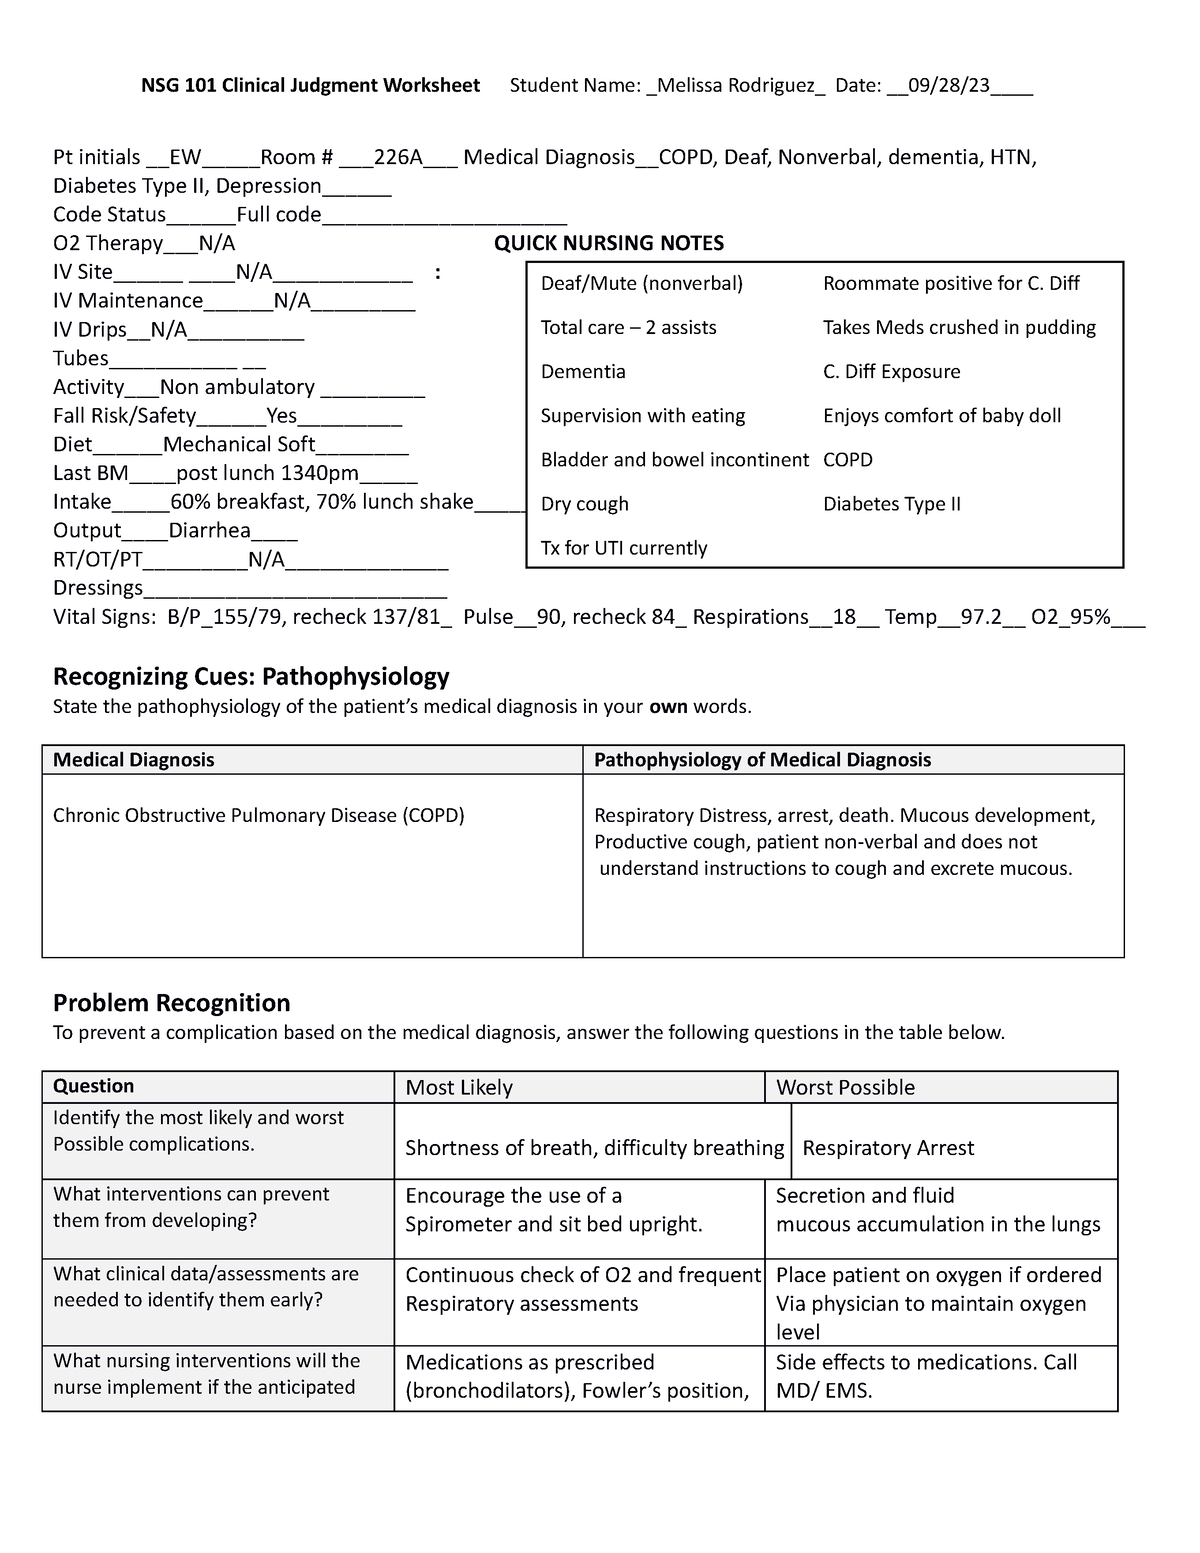 NSG 101- Clinical Judgment Paperwork - NSG 101 Clinical Judgment ...